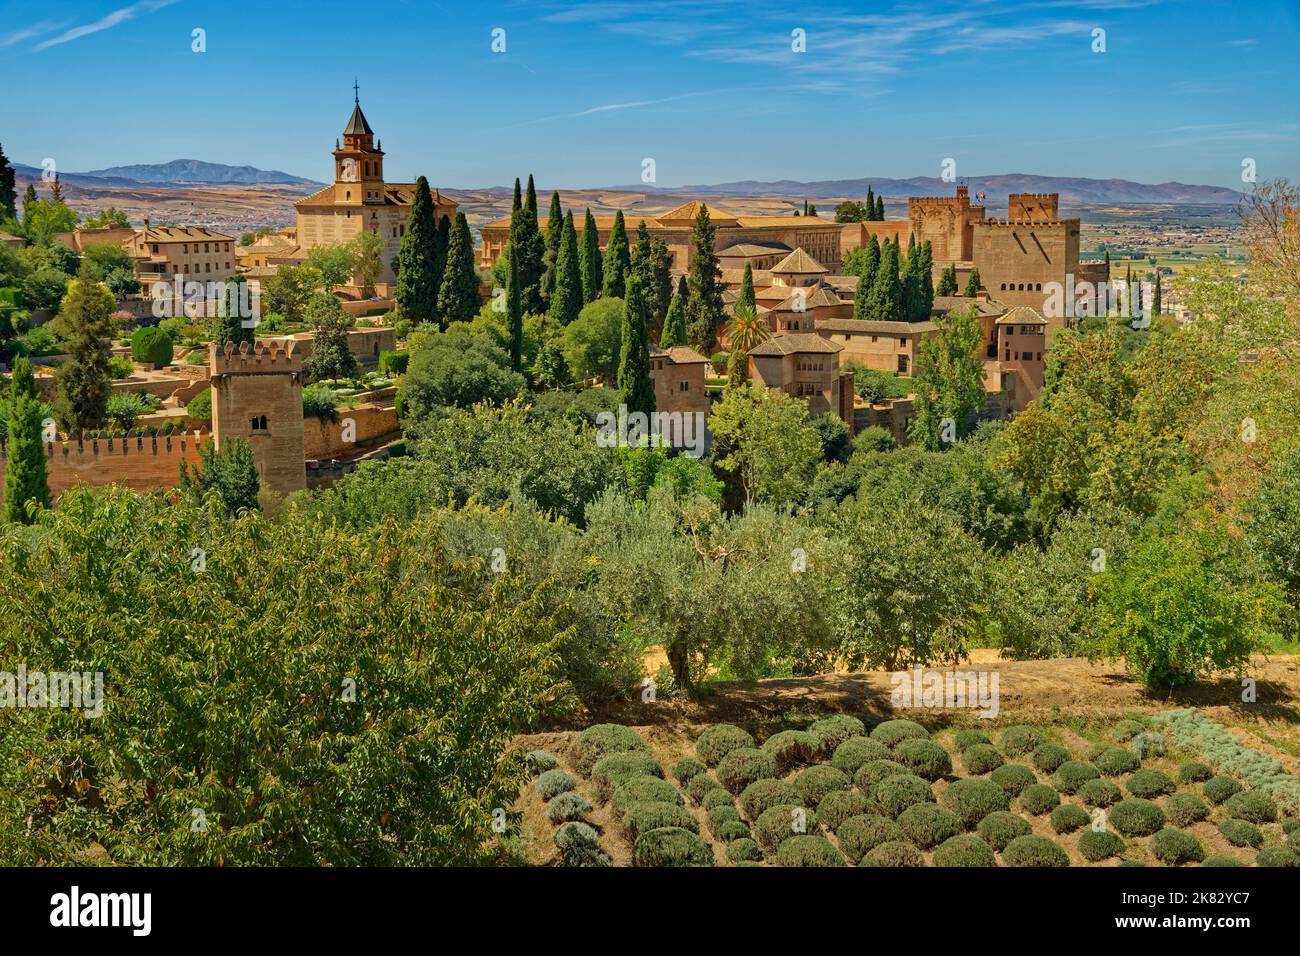 The Nazrid Palaces complex at the Alhambra fortress in Granada, Spain. Stock Photo